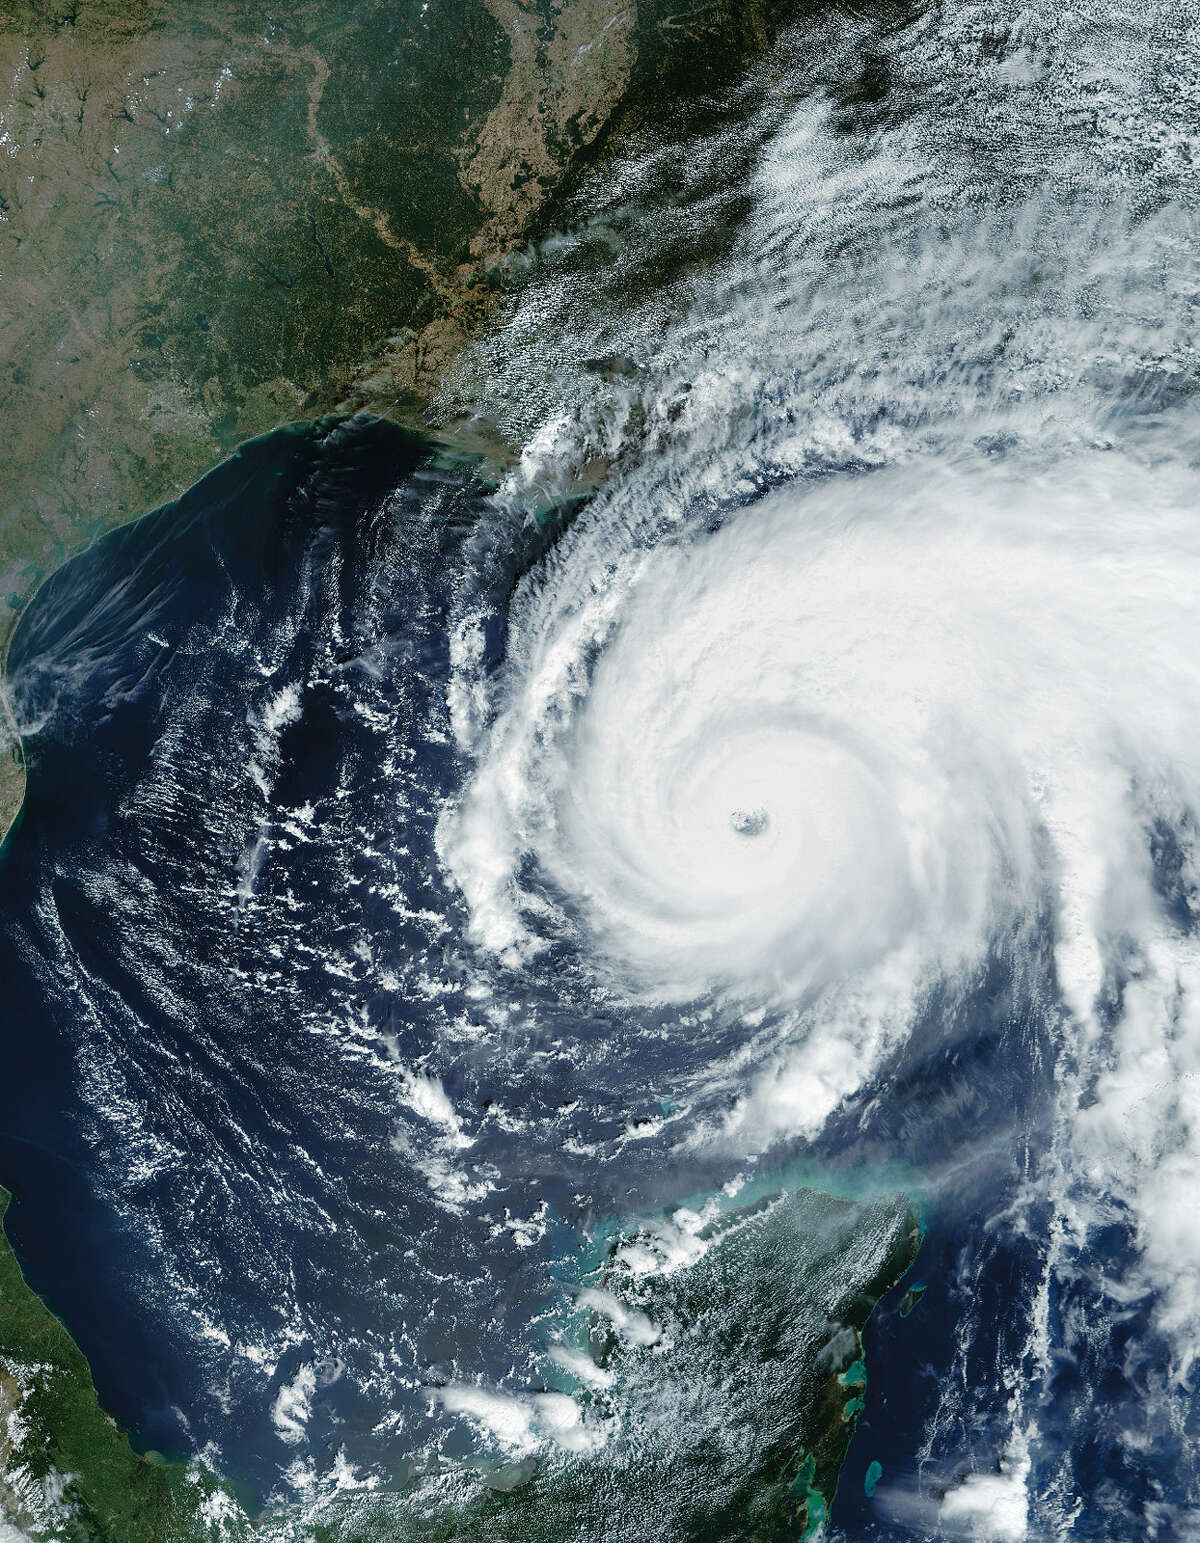 In September 2005, Hurricane Rita devastated Southeast Texas and left residents to grapple with the millions of dollars in damages caused by the storm. Click through the slideshow to see breakdown of the havoc Rita wreaked 10 years ago.